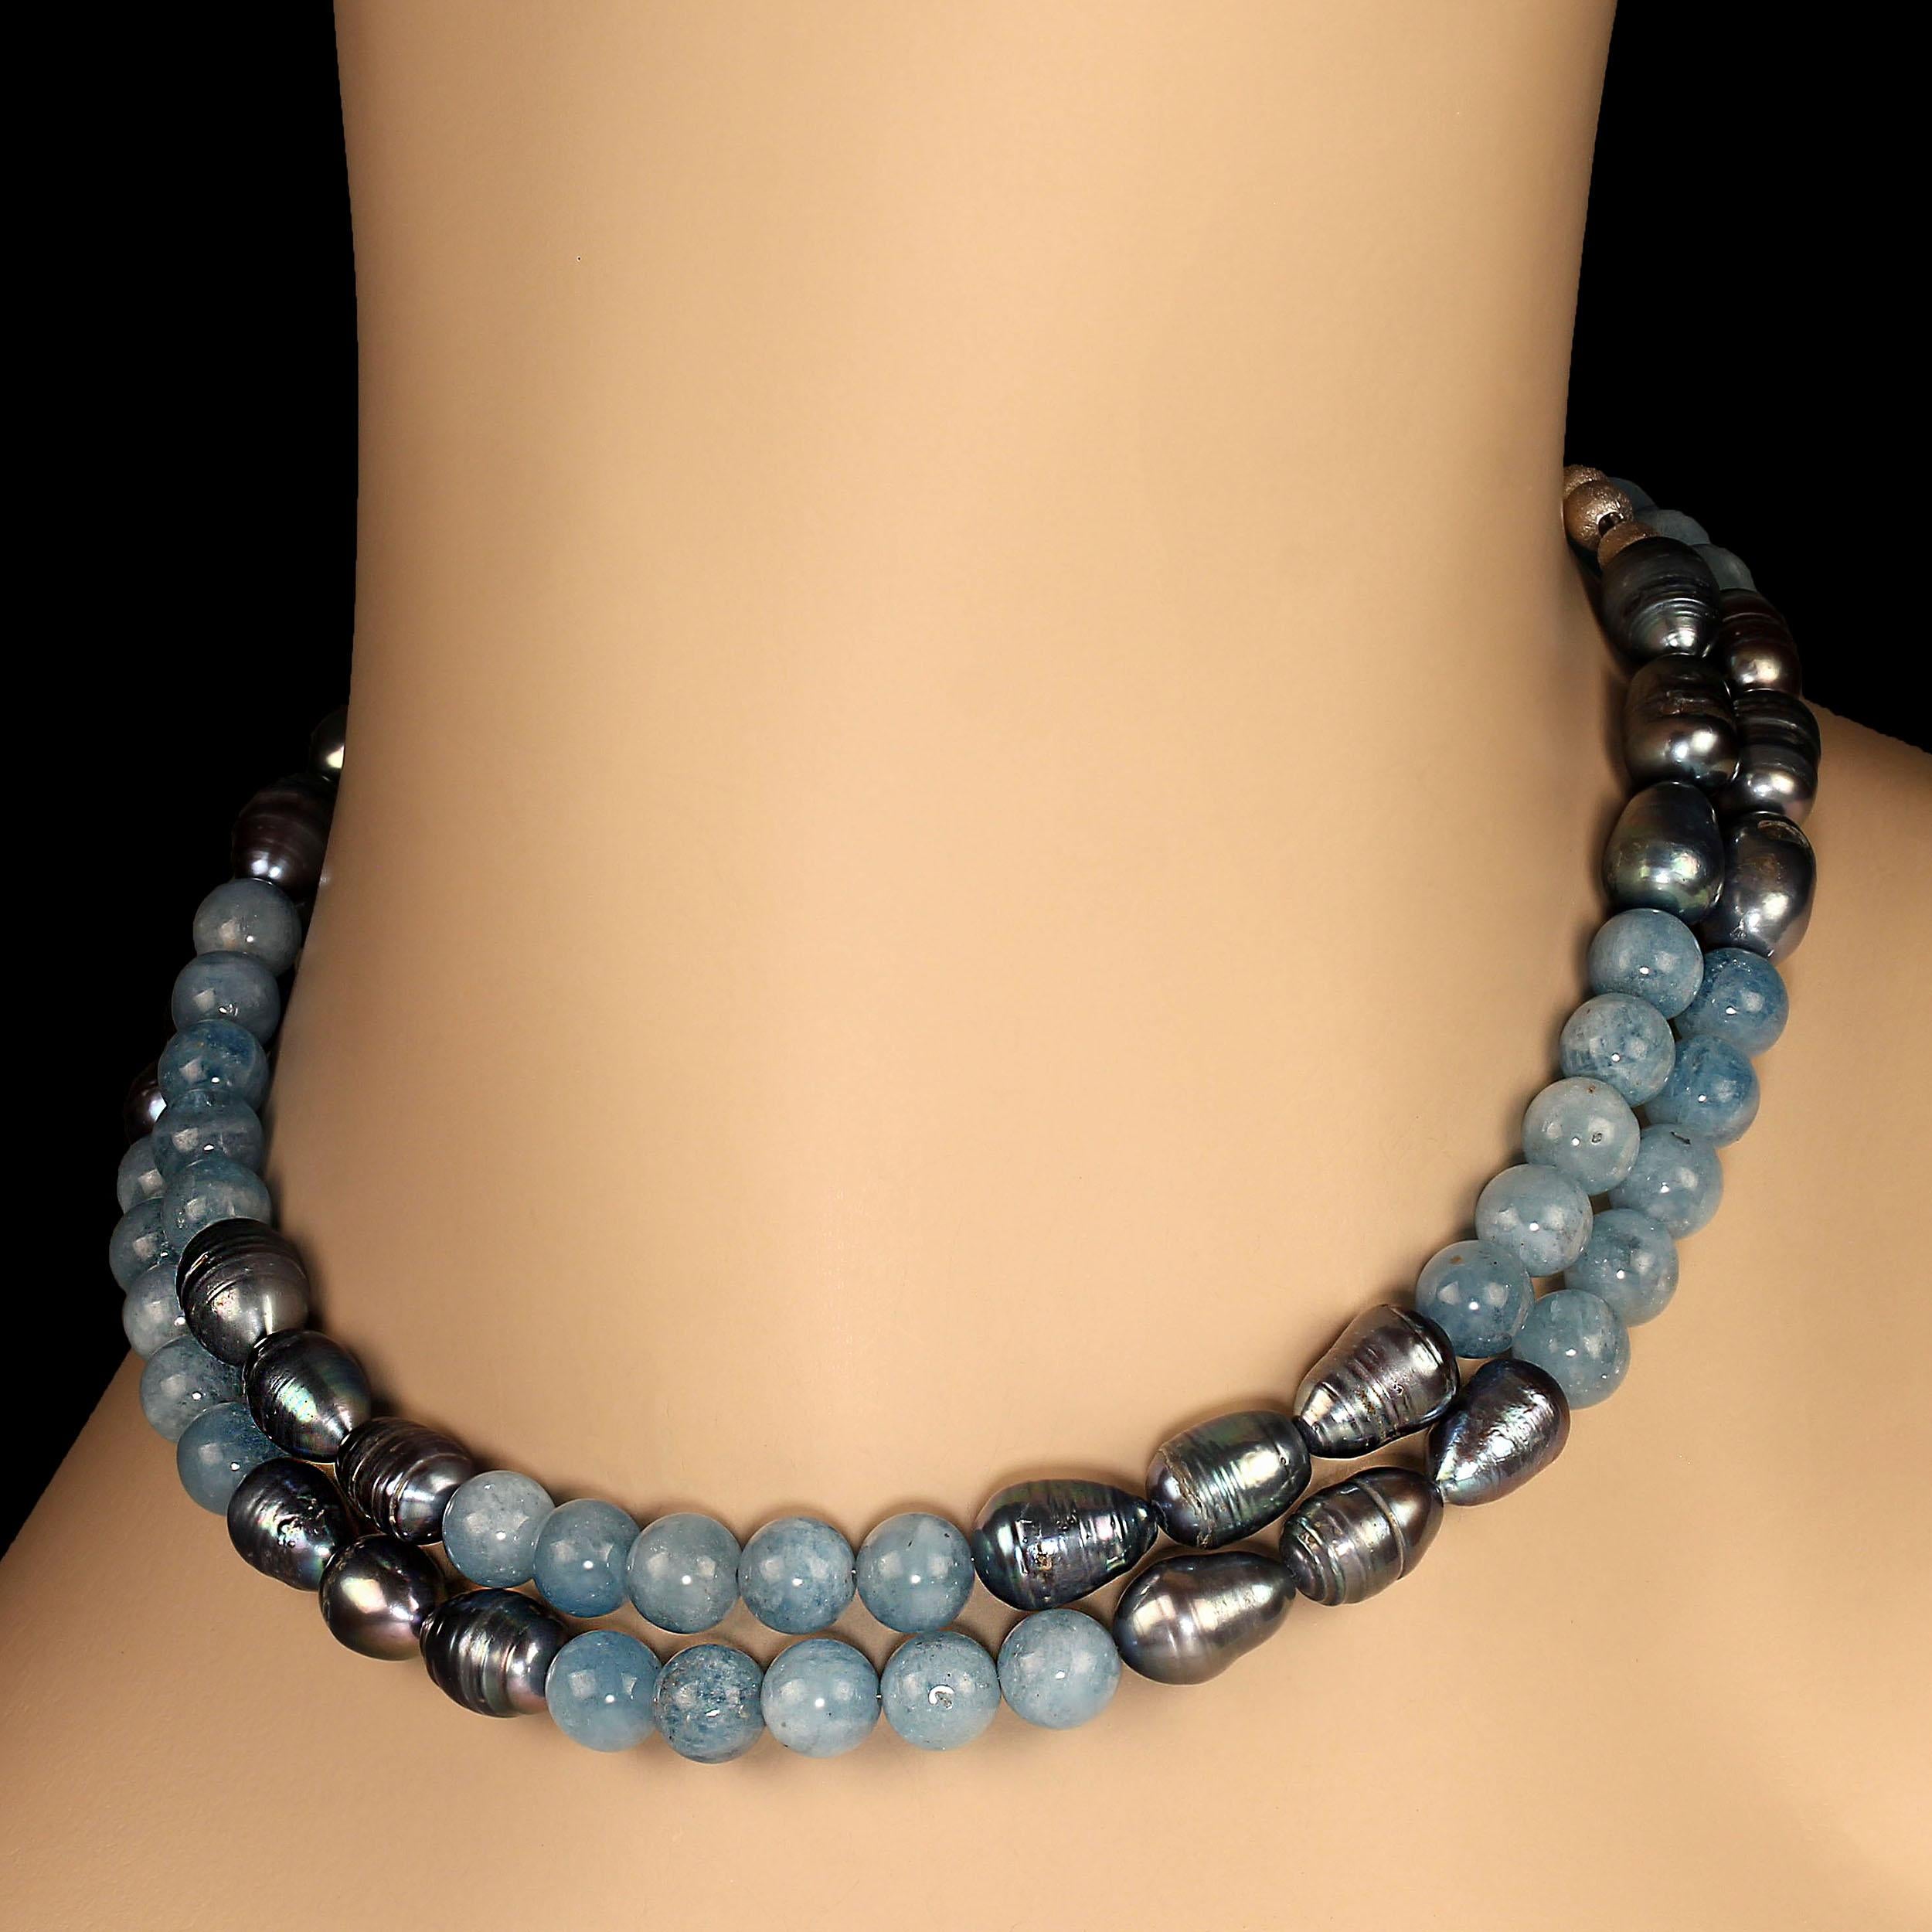 31-Inch sophisticated evening necklace of steel gray potato pearls,12x8mm and medium tone blue 8mm aquamarines. These alternating groups of pearls and aquamarines create an elegant look perfect for your out to dinner or evening affair. At 31 inches